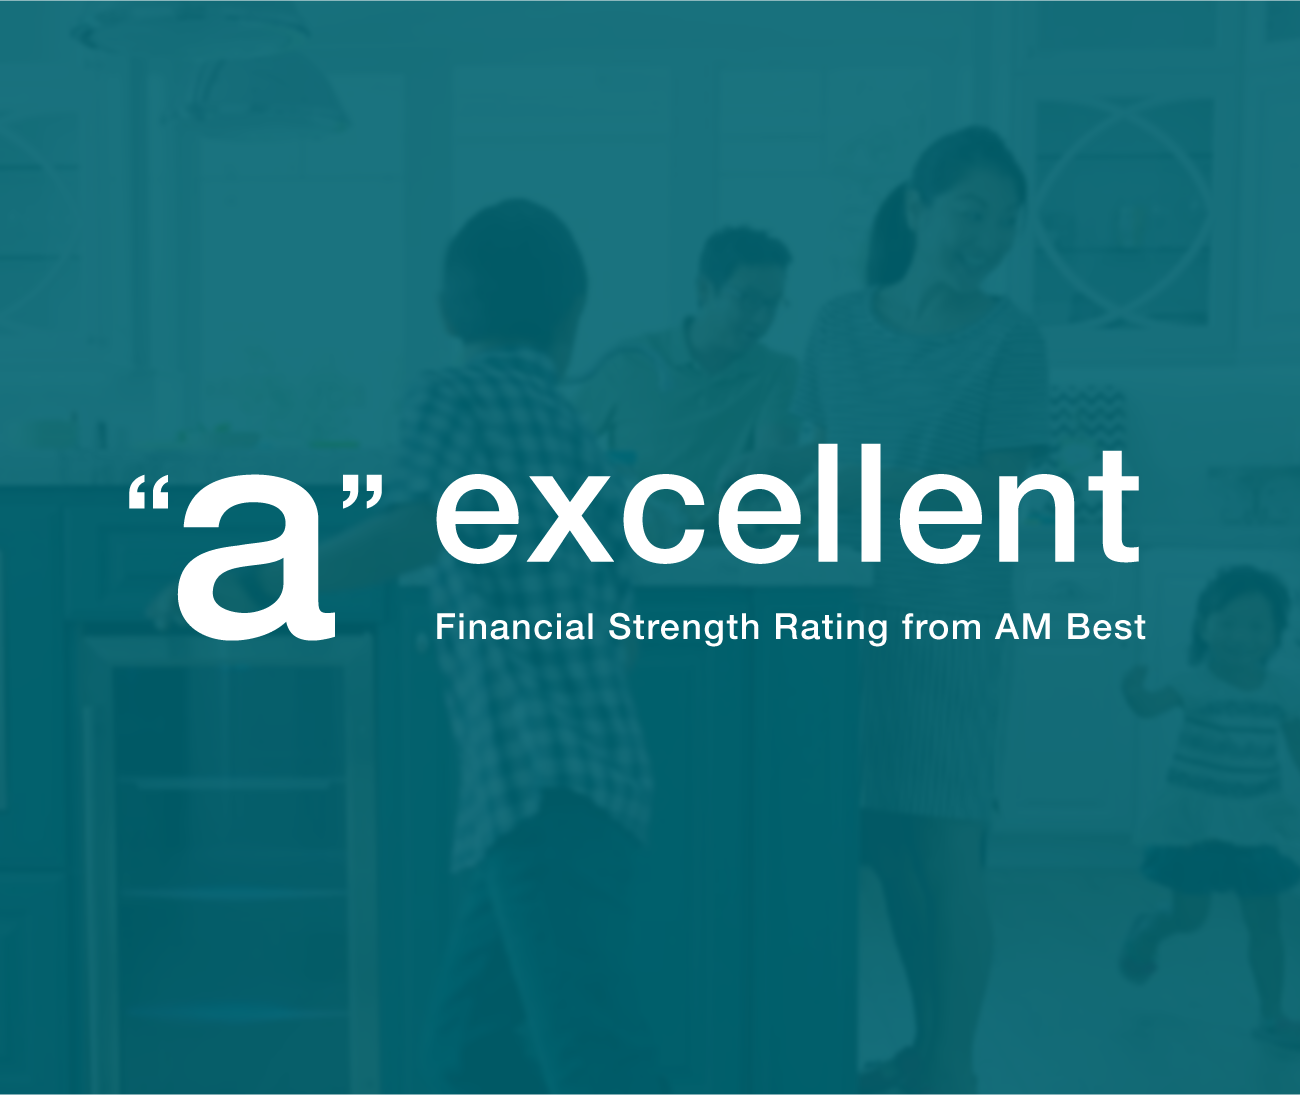 "A" Excellent Financial Strength Rating from AM Best